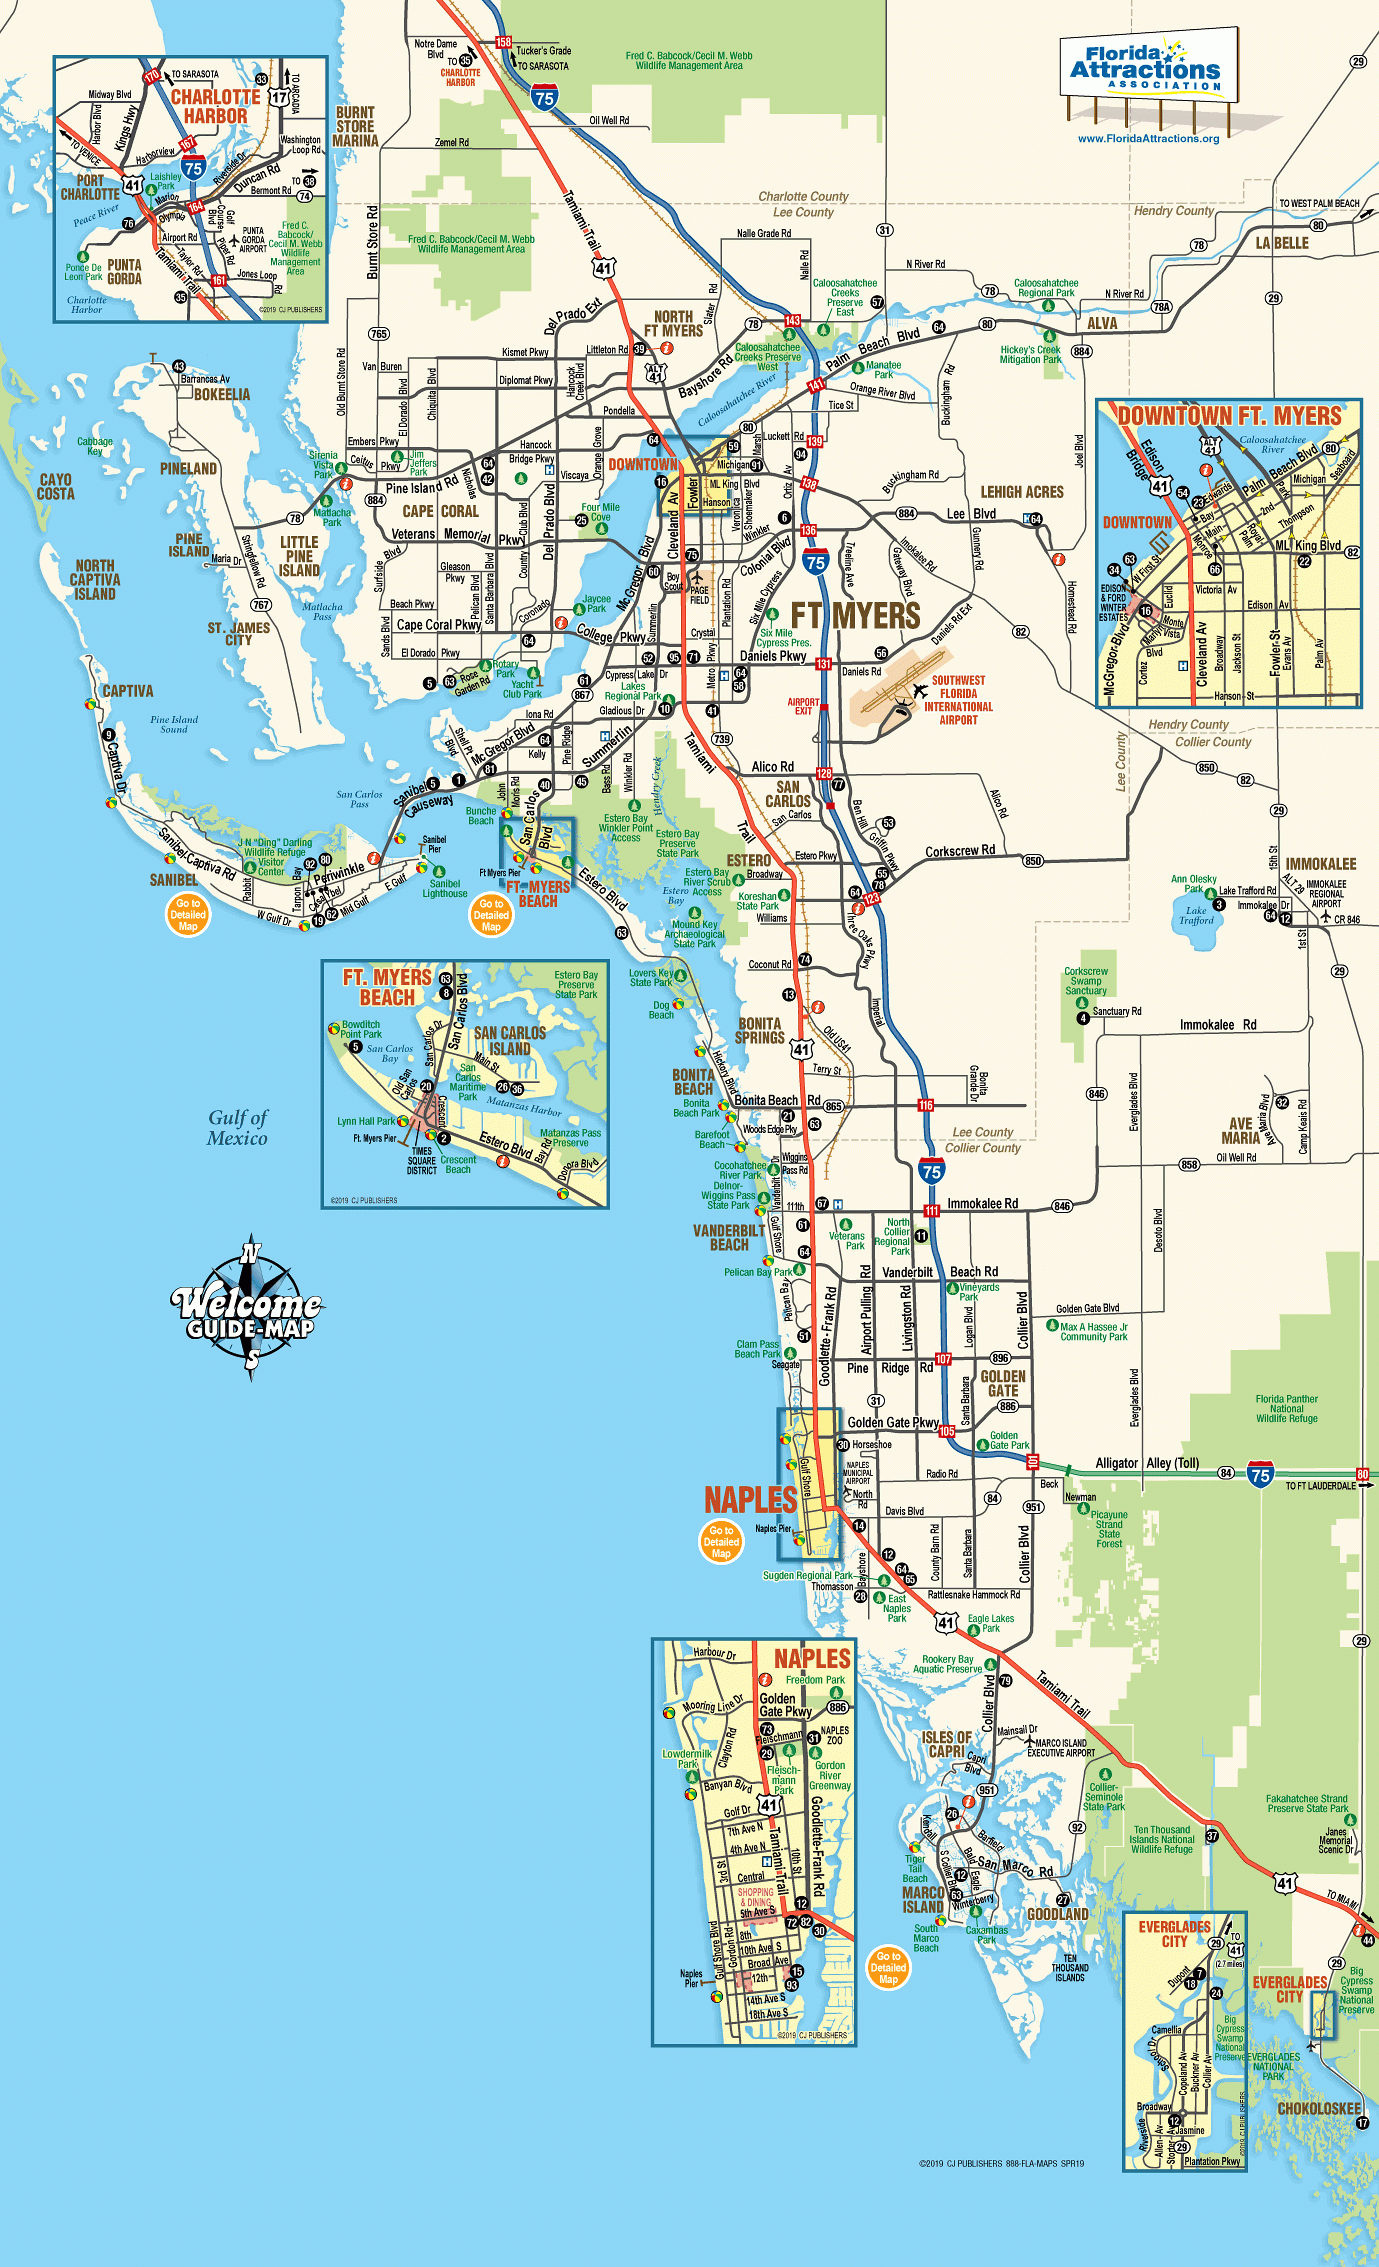 Map Of Southwest Florida - Welcome Guide-Map To Fort Myers &amp;amp; Naples - Sanibel Island Florida Map